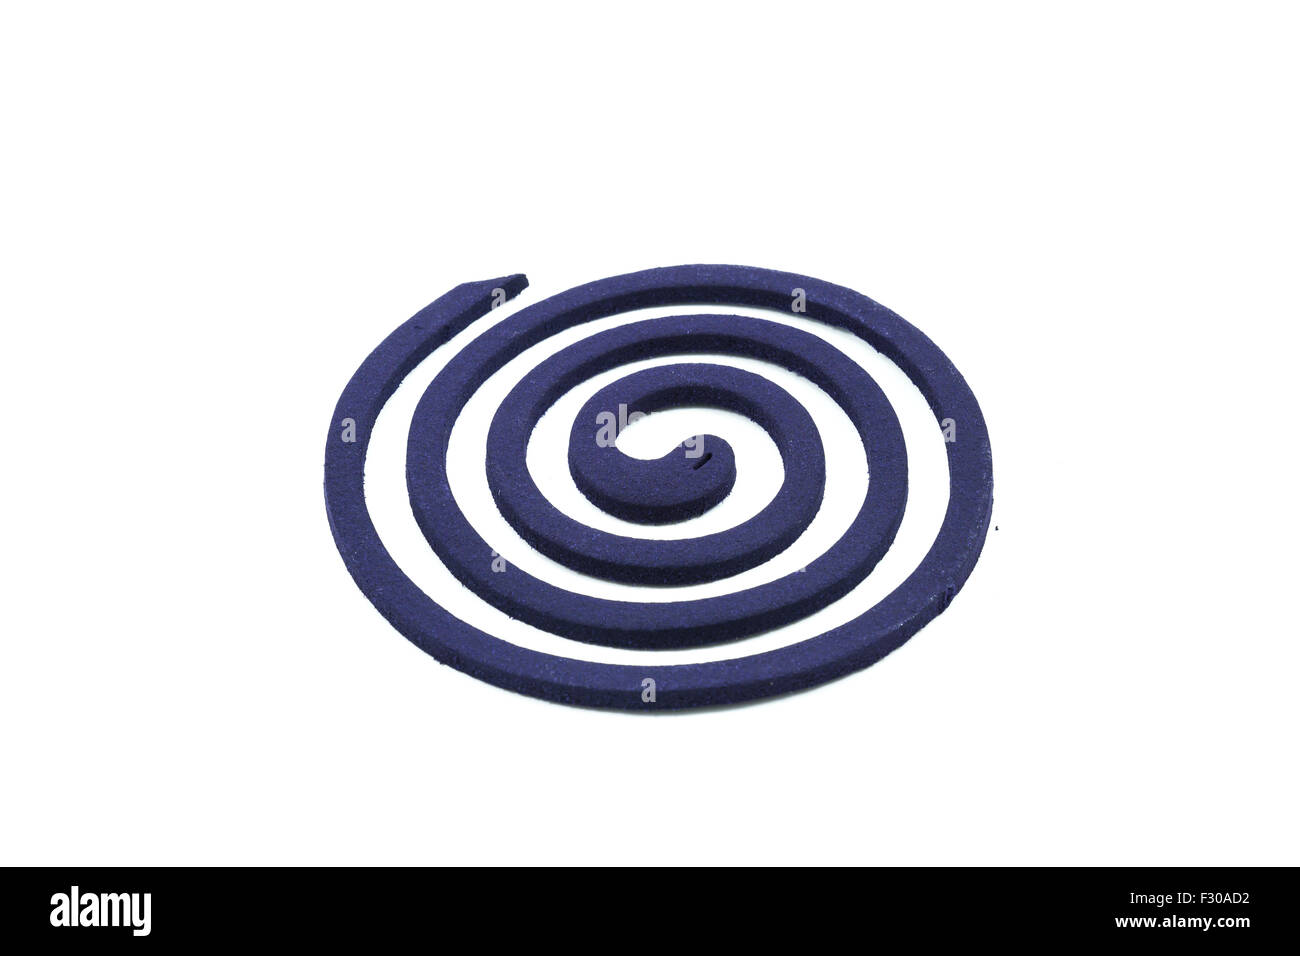 Mosquito coil on white background Stock Photo